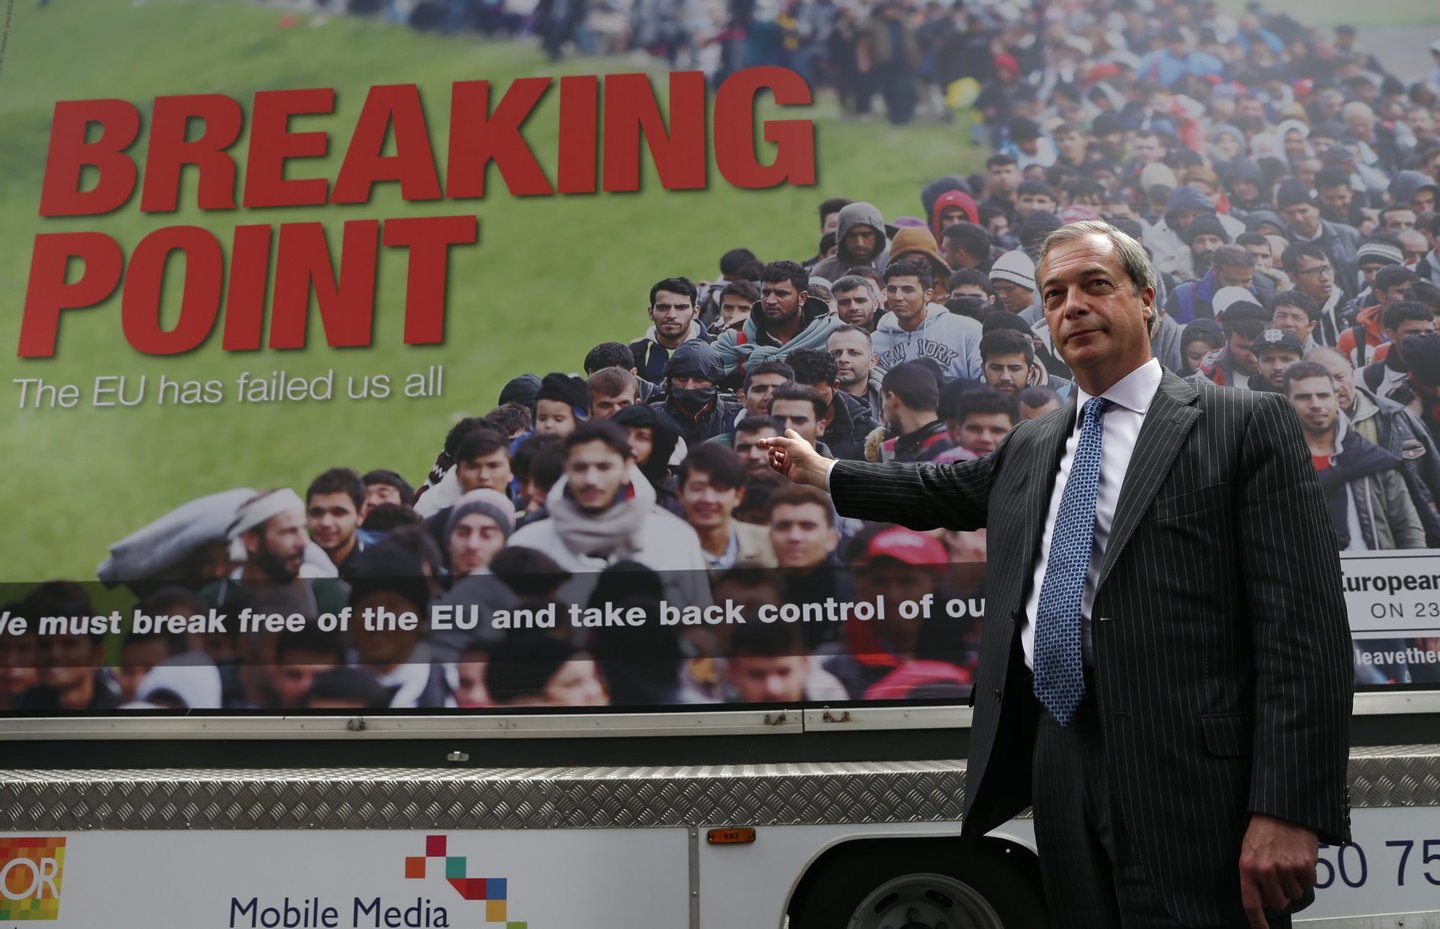 UK Independence Party Leader (UKIP) Nigel Farage poses during the launch of a national poster campaign urging voters to vote to leave the EU ahead of the EU referendum, in London on June 16, 2016. Britain goes to the polls in a week on June 23 to vote in a referendum on whether to remain in or leave the European Union. / AFP / Daniel Leal-Olivas (Photo credit should read DANIEL LEAL-OLIVAS/AFP/Getty Images)